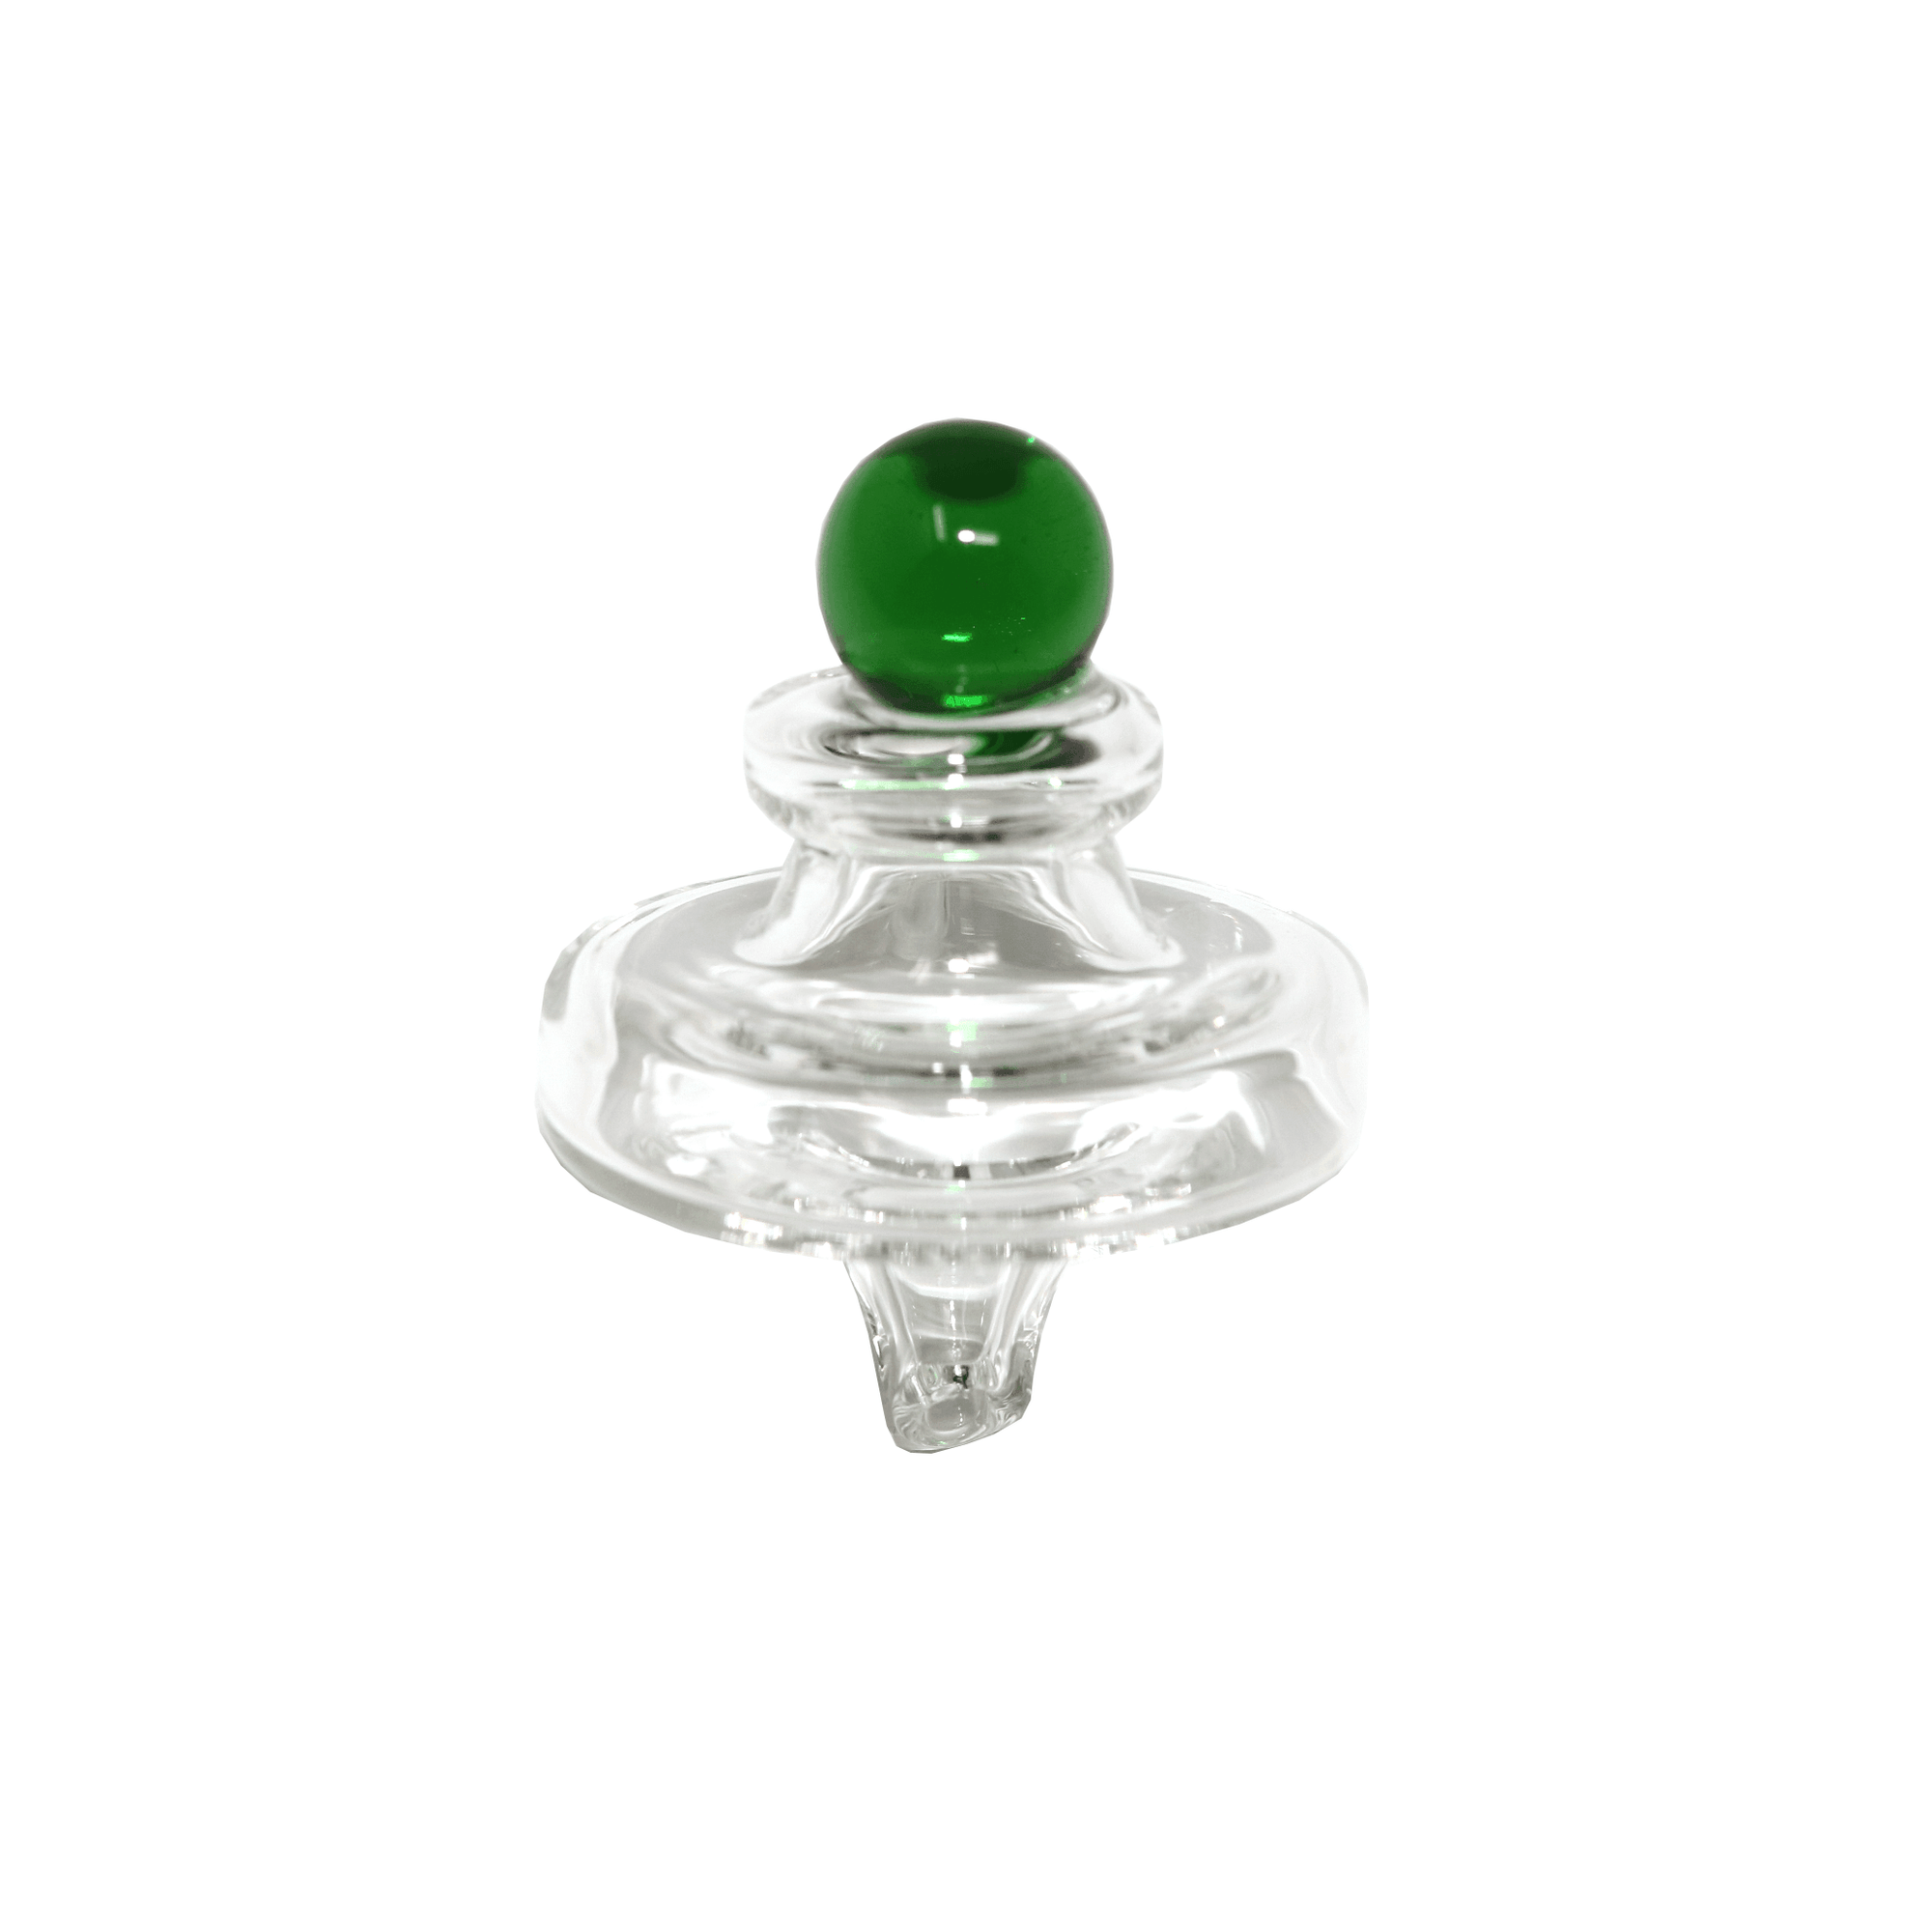 14mm Female Quartz E-Banger for 20mm Coil With Saucer Cap | Carb Cap View | the dabbing specialists